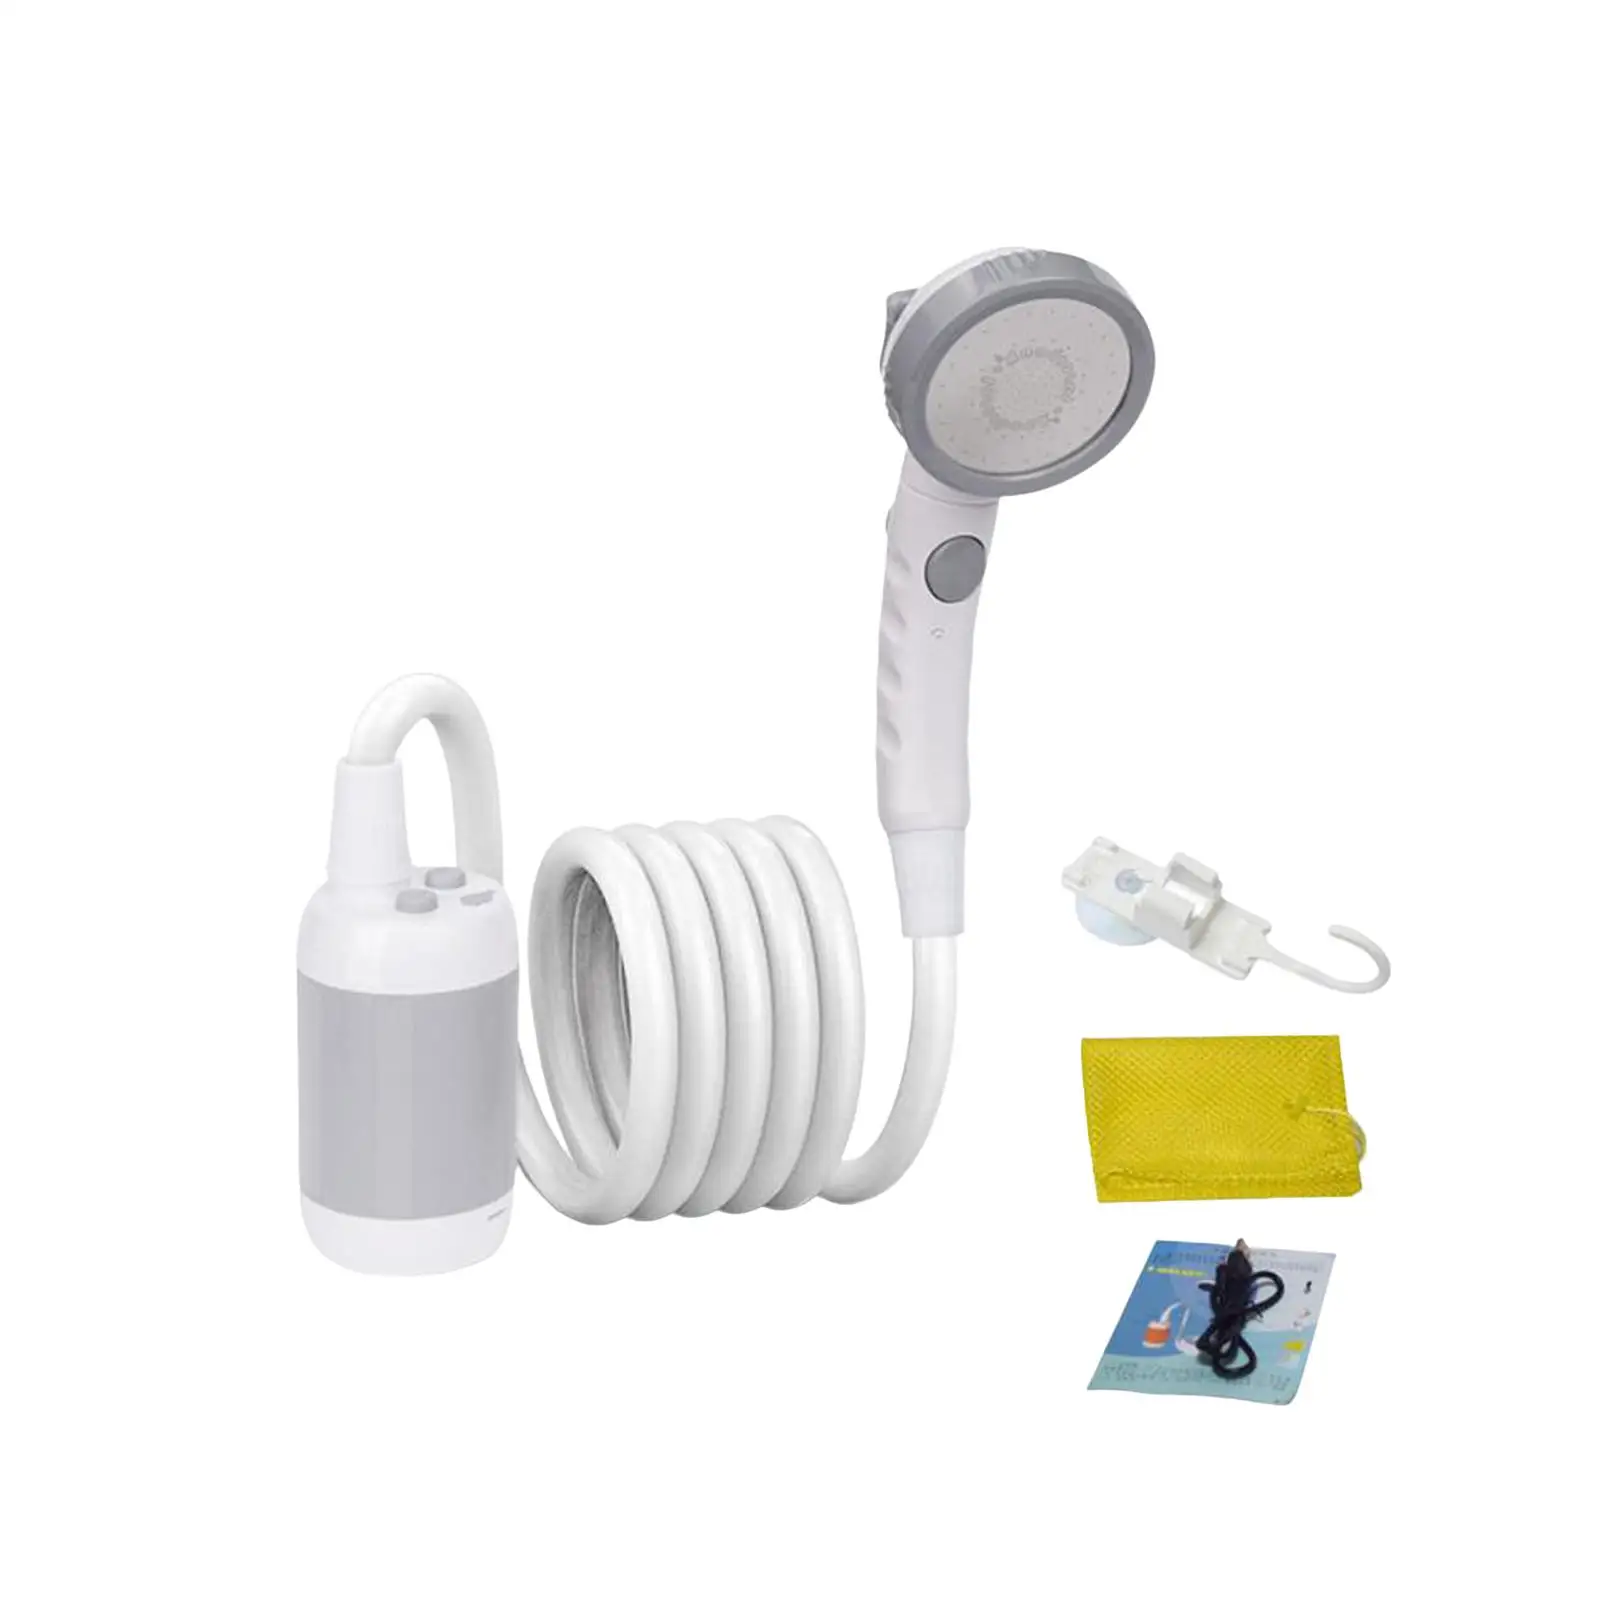 

Portable Shower with 1.8M Hose Camp Shower USB Rechargeable Electric Shower for Hiking Beach Traveling Backpacking Car Washing